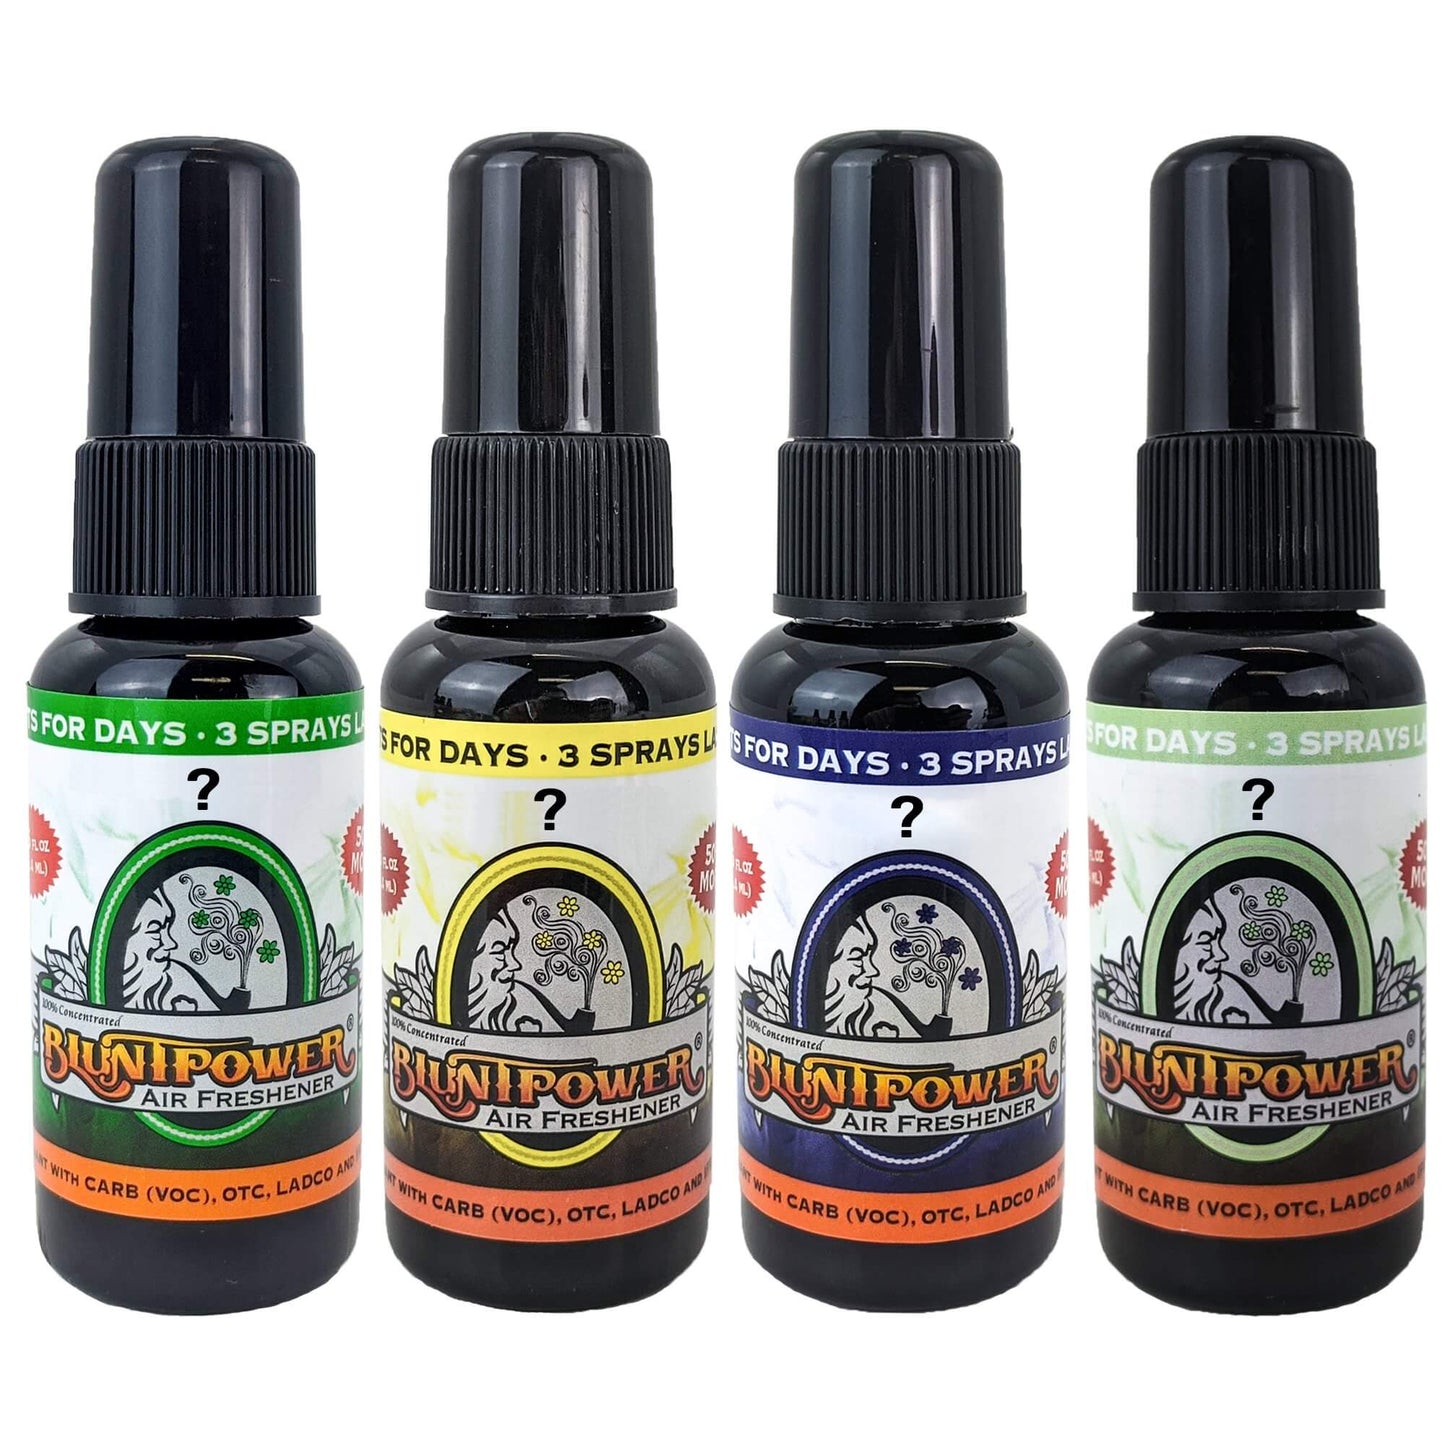 4-Pack Assorted 1.5 OZ Blunt Power Spray Air Fresheners